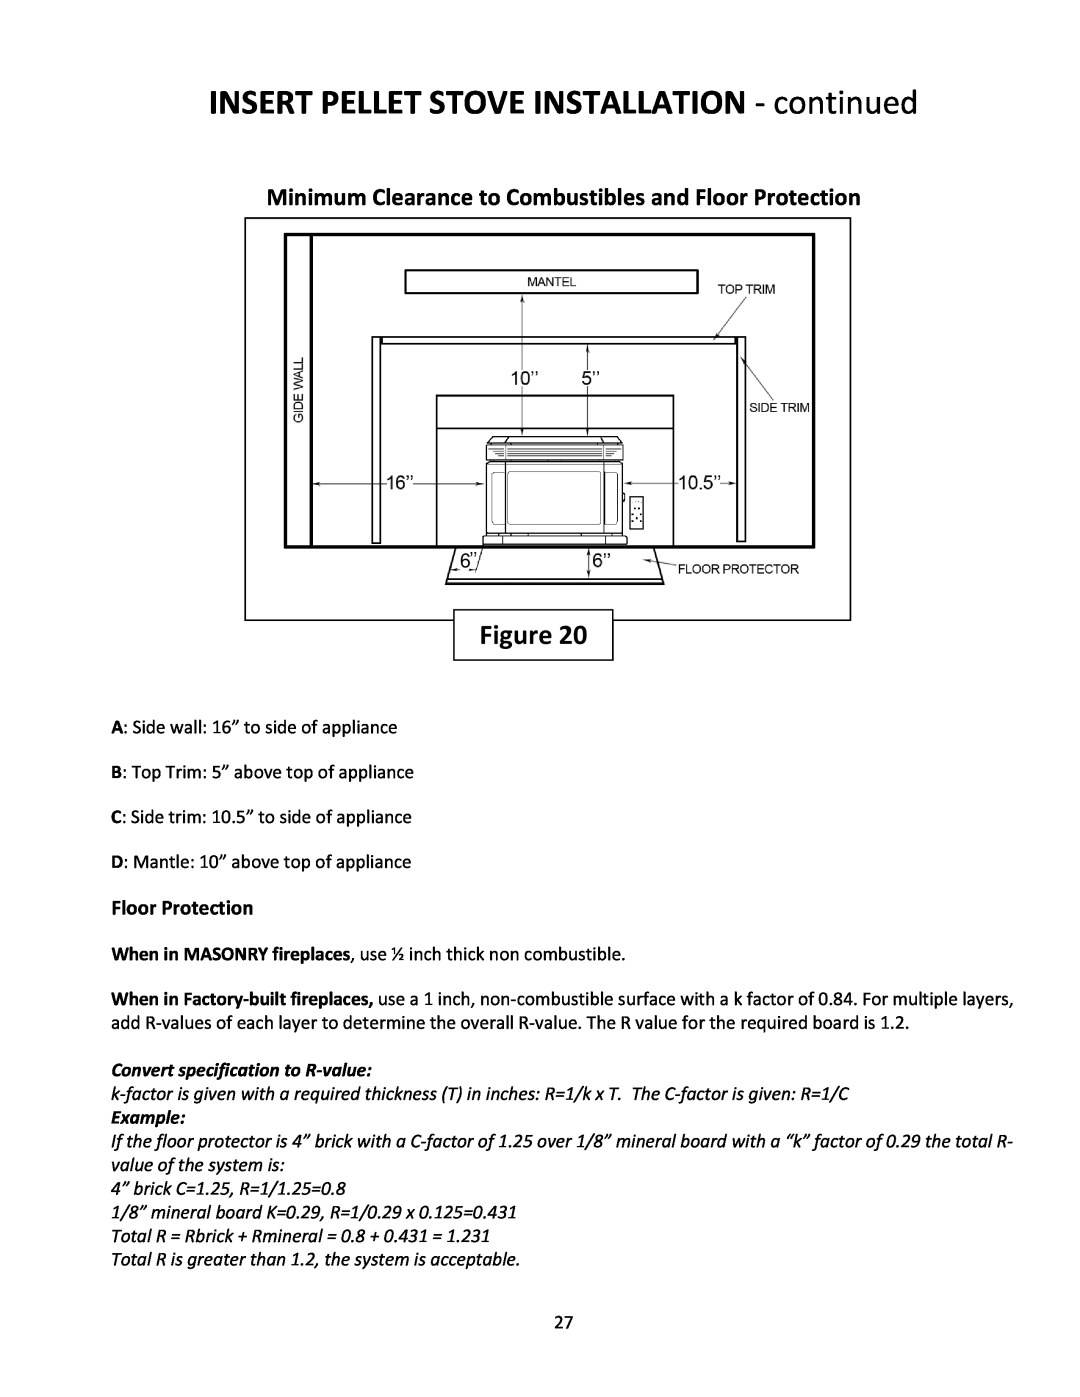 United States Stove 5660(I) manual INSERT PELLET STOVE INSTALLATION ‐ continued, Floor Protection 